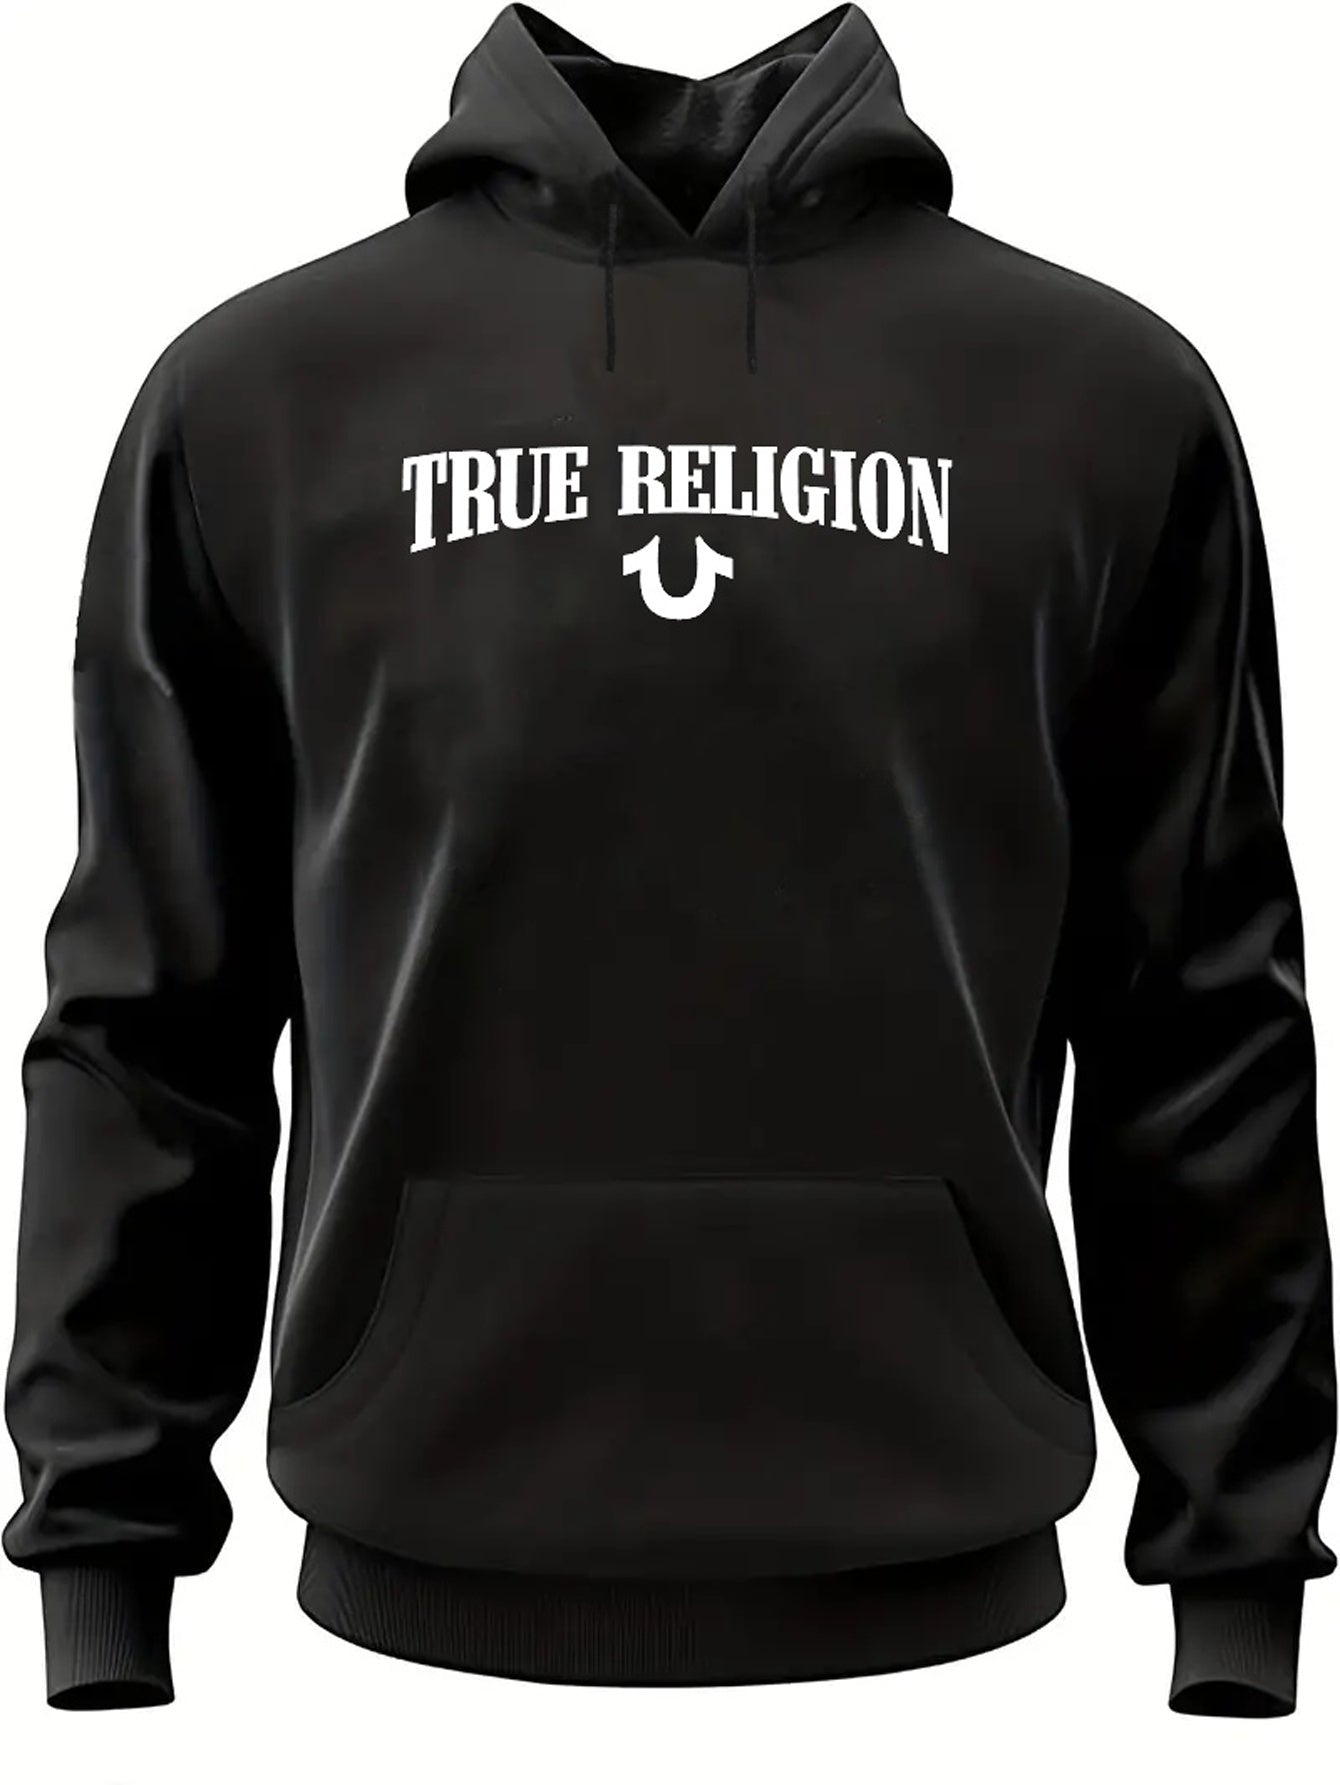 TRUE RELIGION Print Hoodies For Men, Graphic Hoodie With Kangaroo Pocket, Comfy Loose Trendy Hooded Pullover, Mens Clothing For Autumn Winter